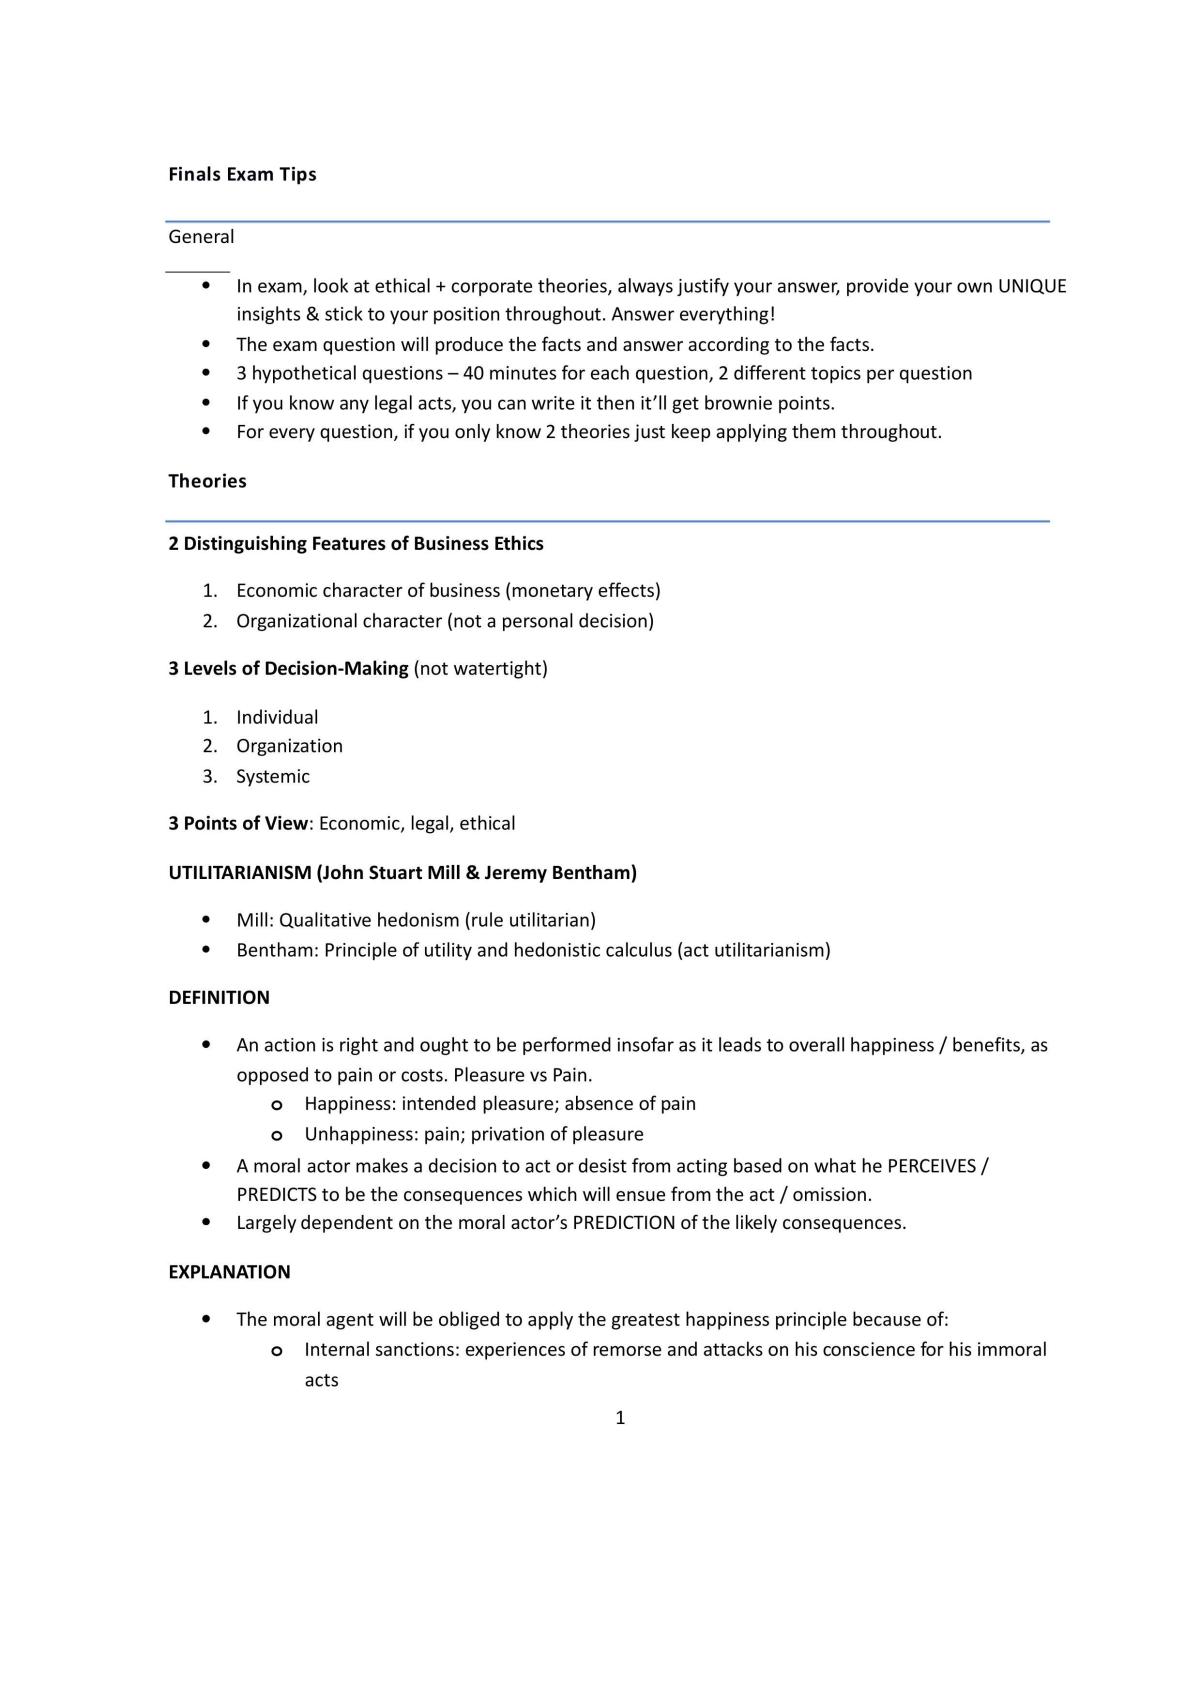 Ethics and Social Responsibility Cheatsheet for Finals - Page 1